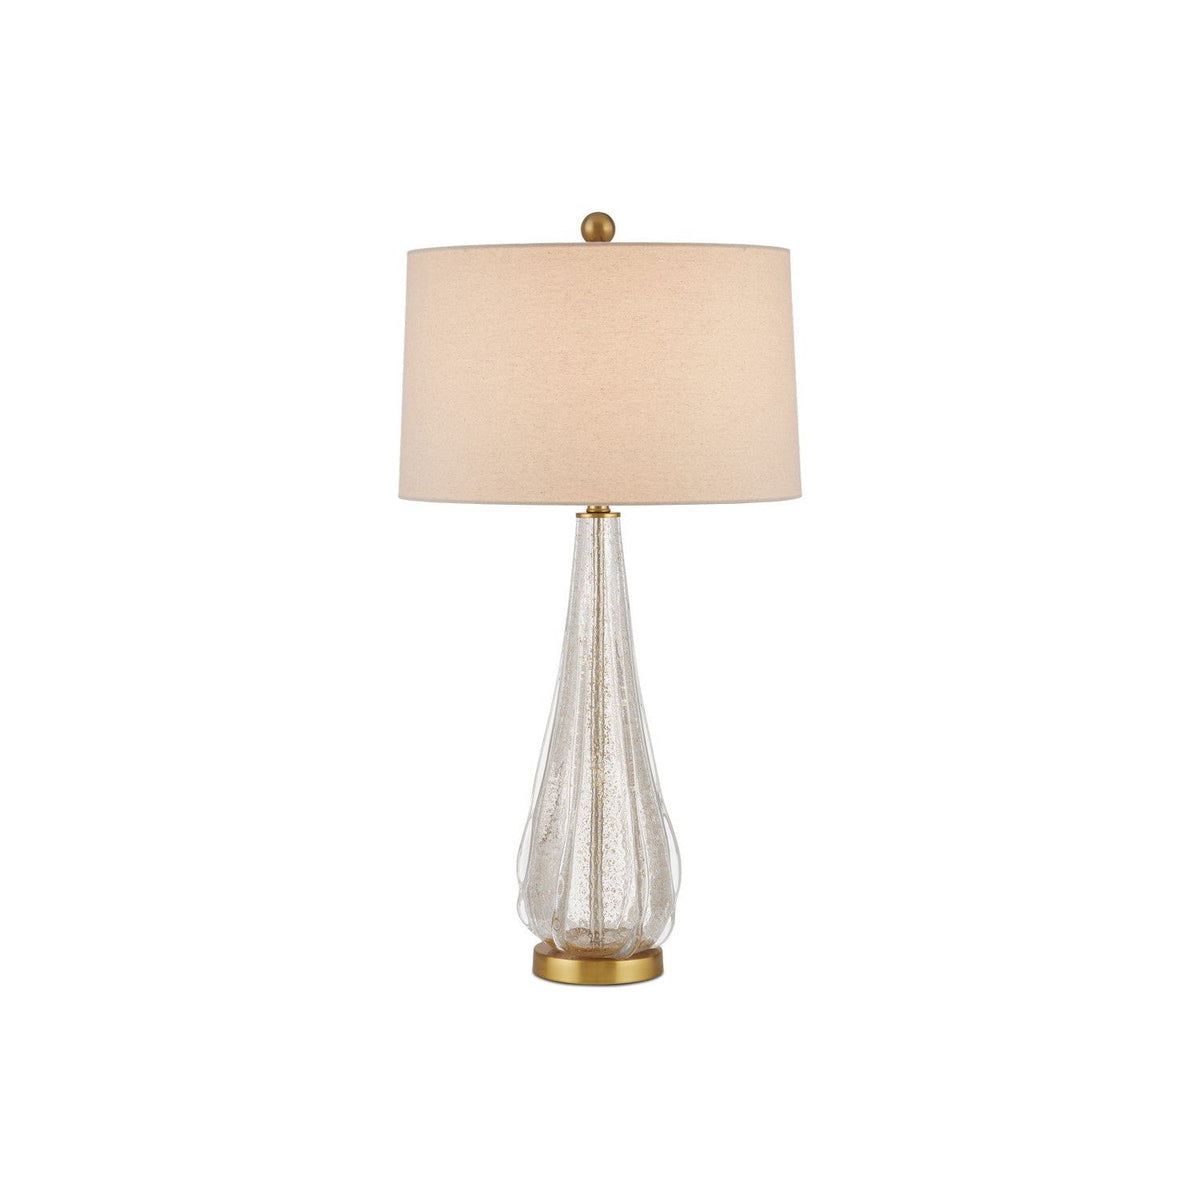 Currey and Company - 6000-0946 - One Light Table Lamp - Clear/Gold/Antique Brass